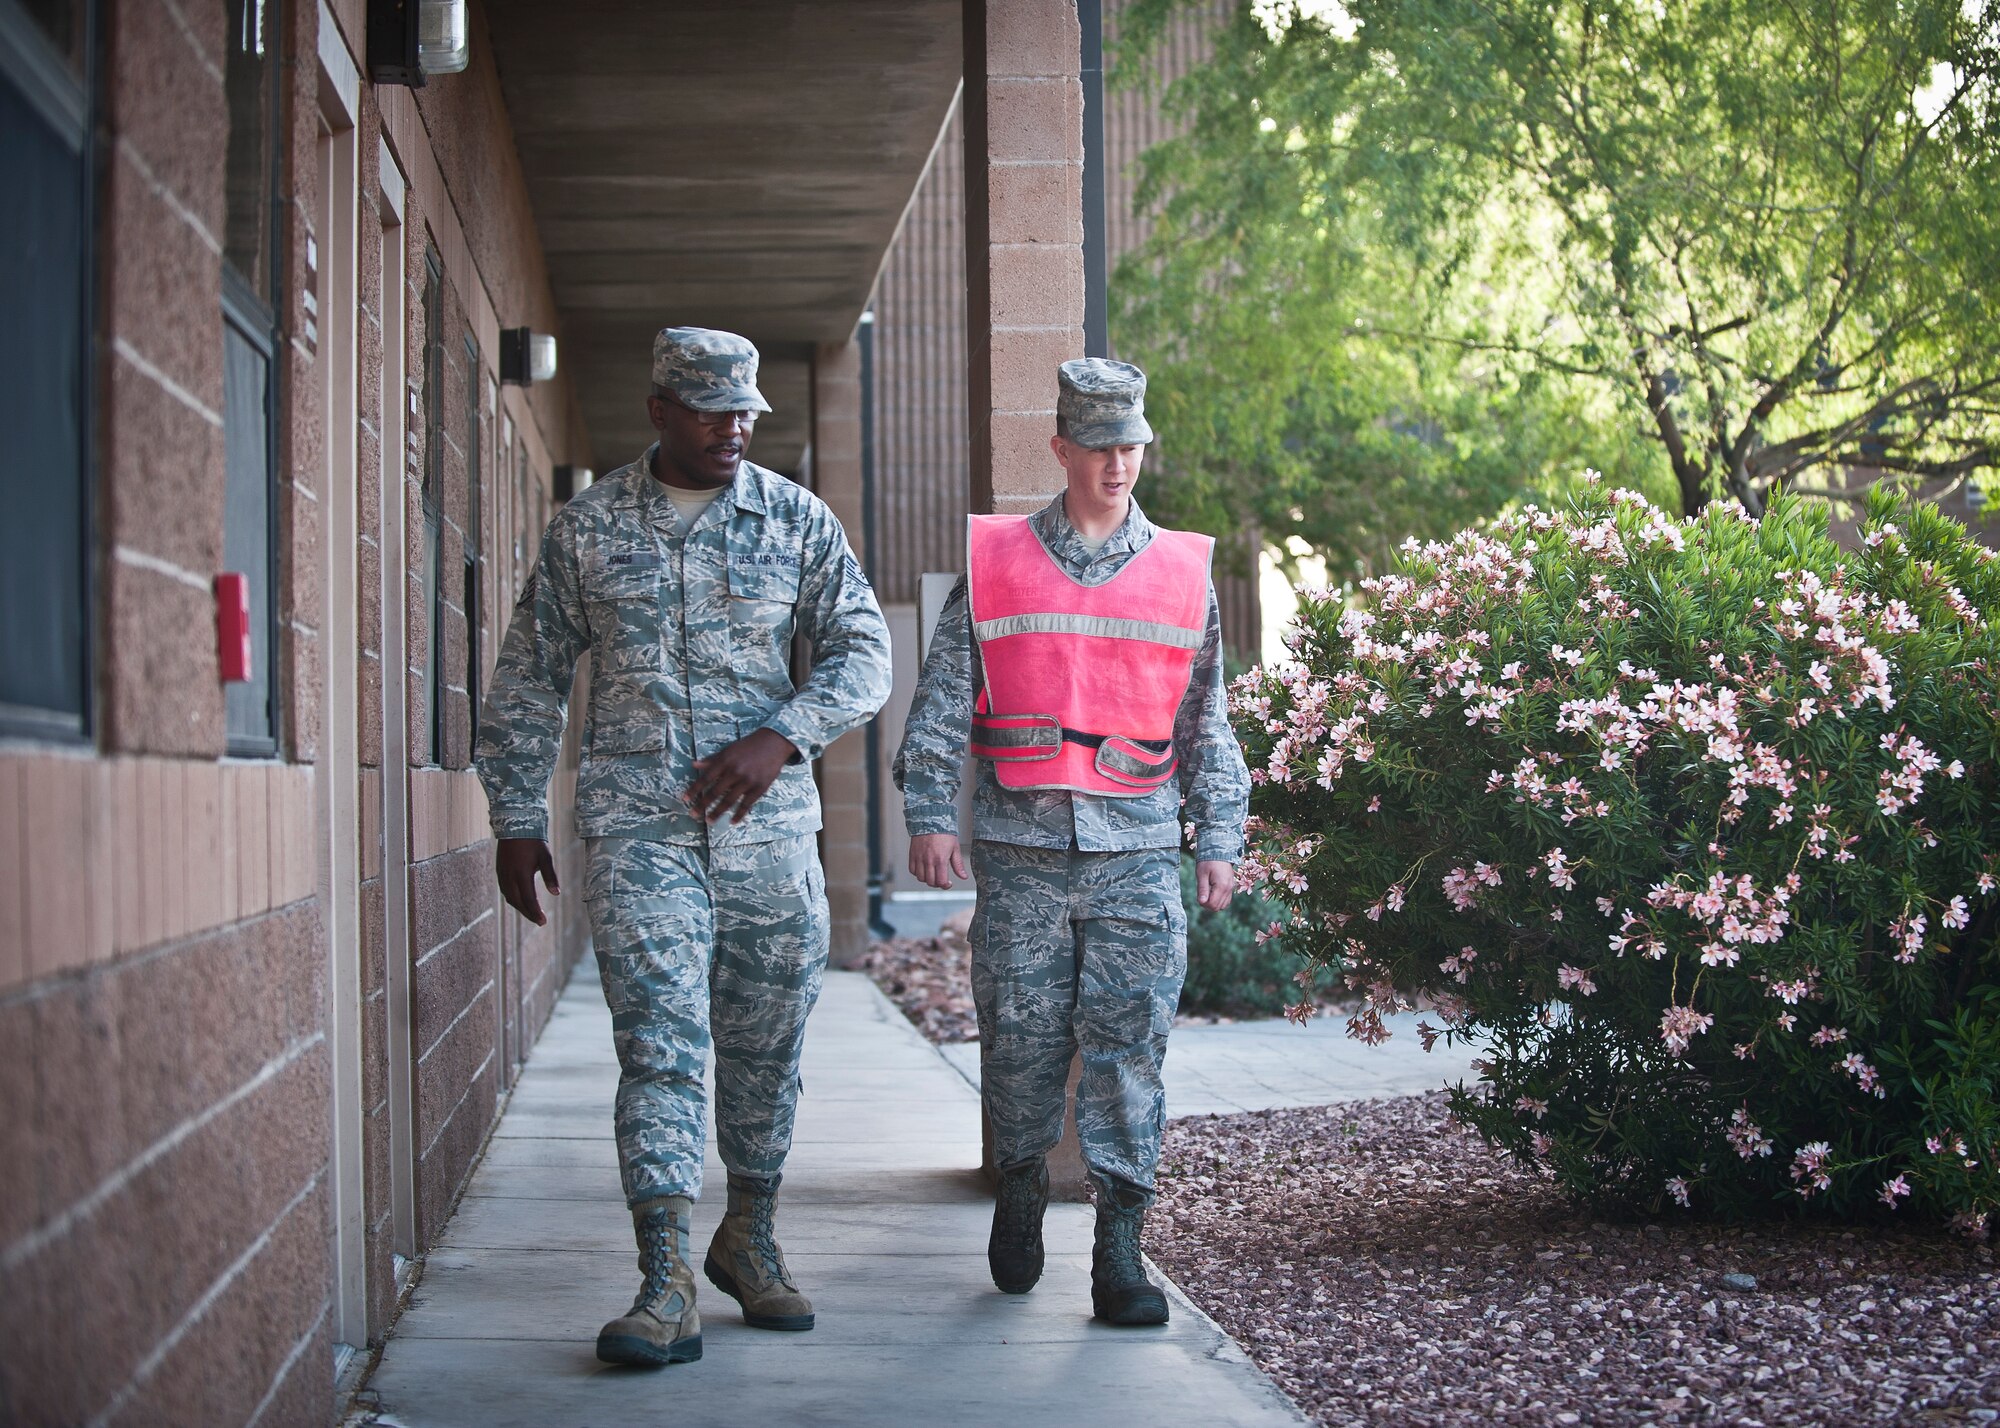 Staff Sgt. Council Jones, 99th Civil Engineer Squadron airman dormitory leader, mentors an Airman at Nellis Air Force Base, Nev., April 7, 2015. Jones, a security forces member by trade, passes on his experiences and wisdom gained from his career -- which almost ended prematurely because of an expletive-laced rant he made toward his squadron leadership -- to any Airman that will listen. (U.S. Air Force photo by Staff Sgt. Siuta B. Ika)